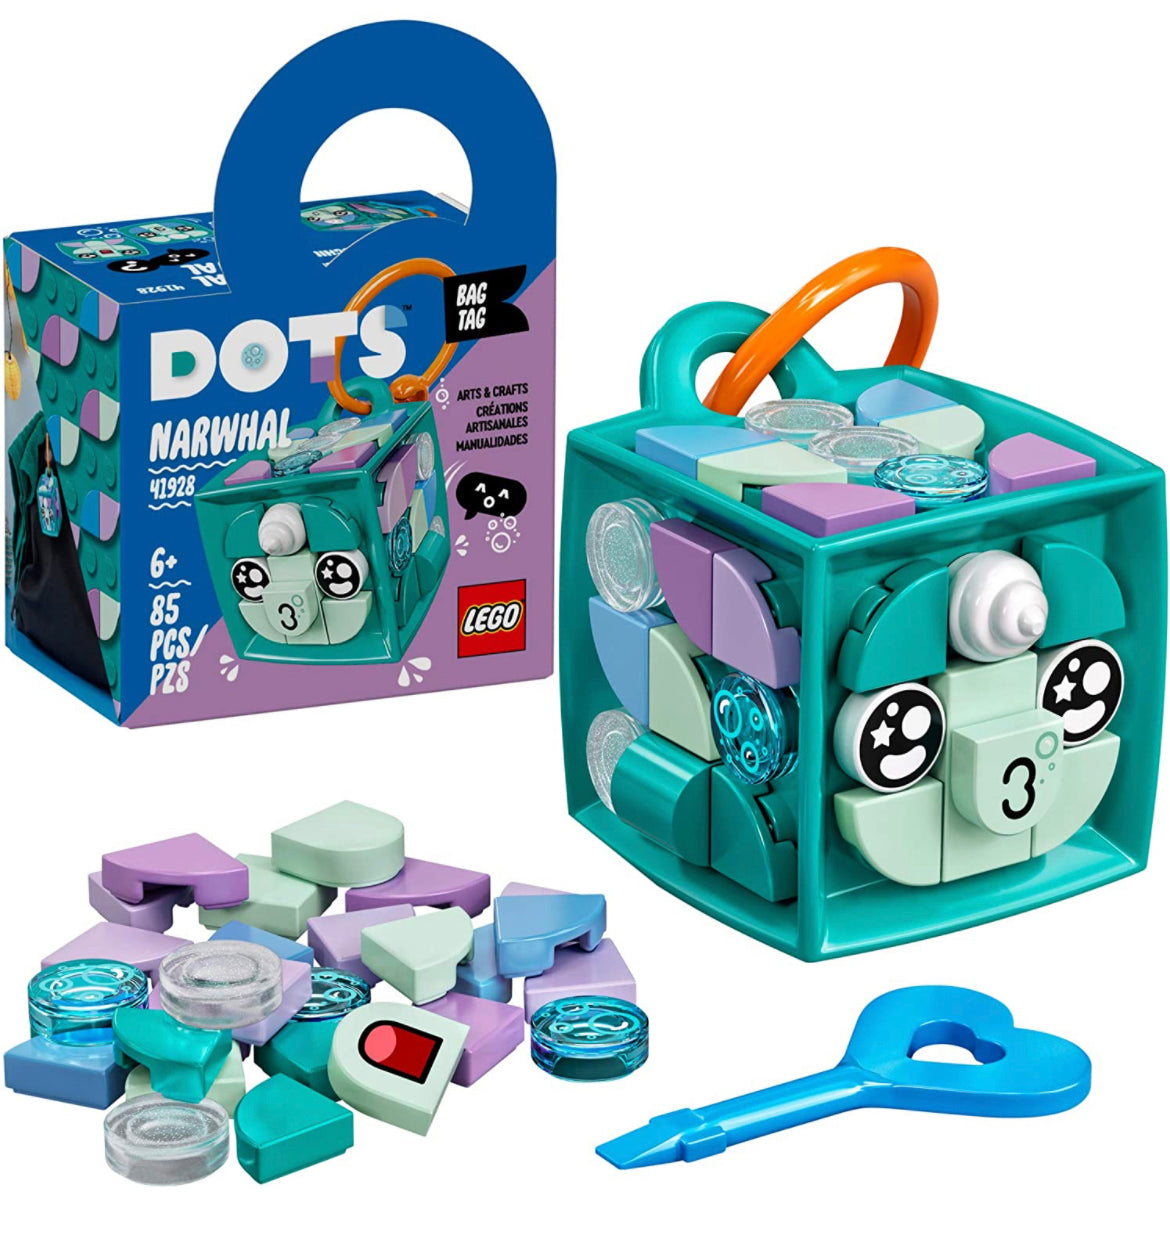 LEGO DOTS Bag Tag Narwhal (85 Pieces)